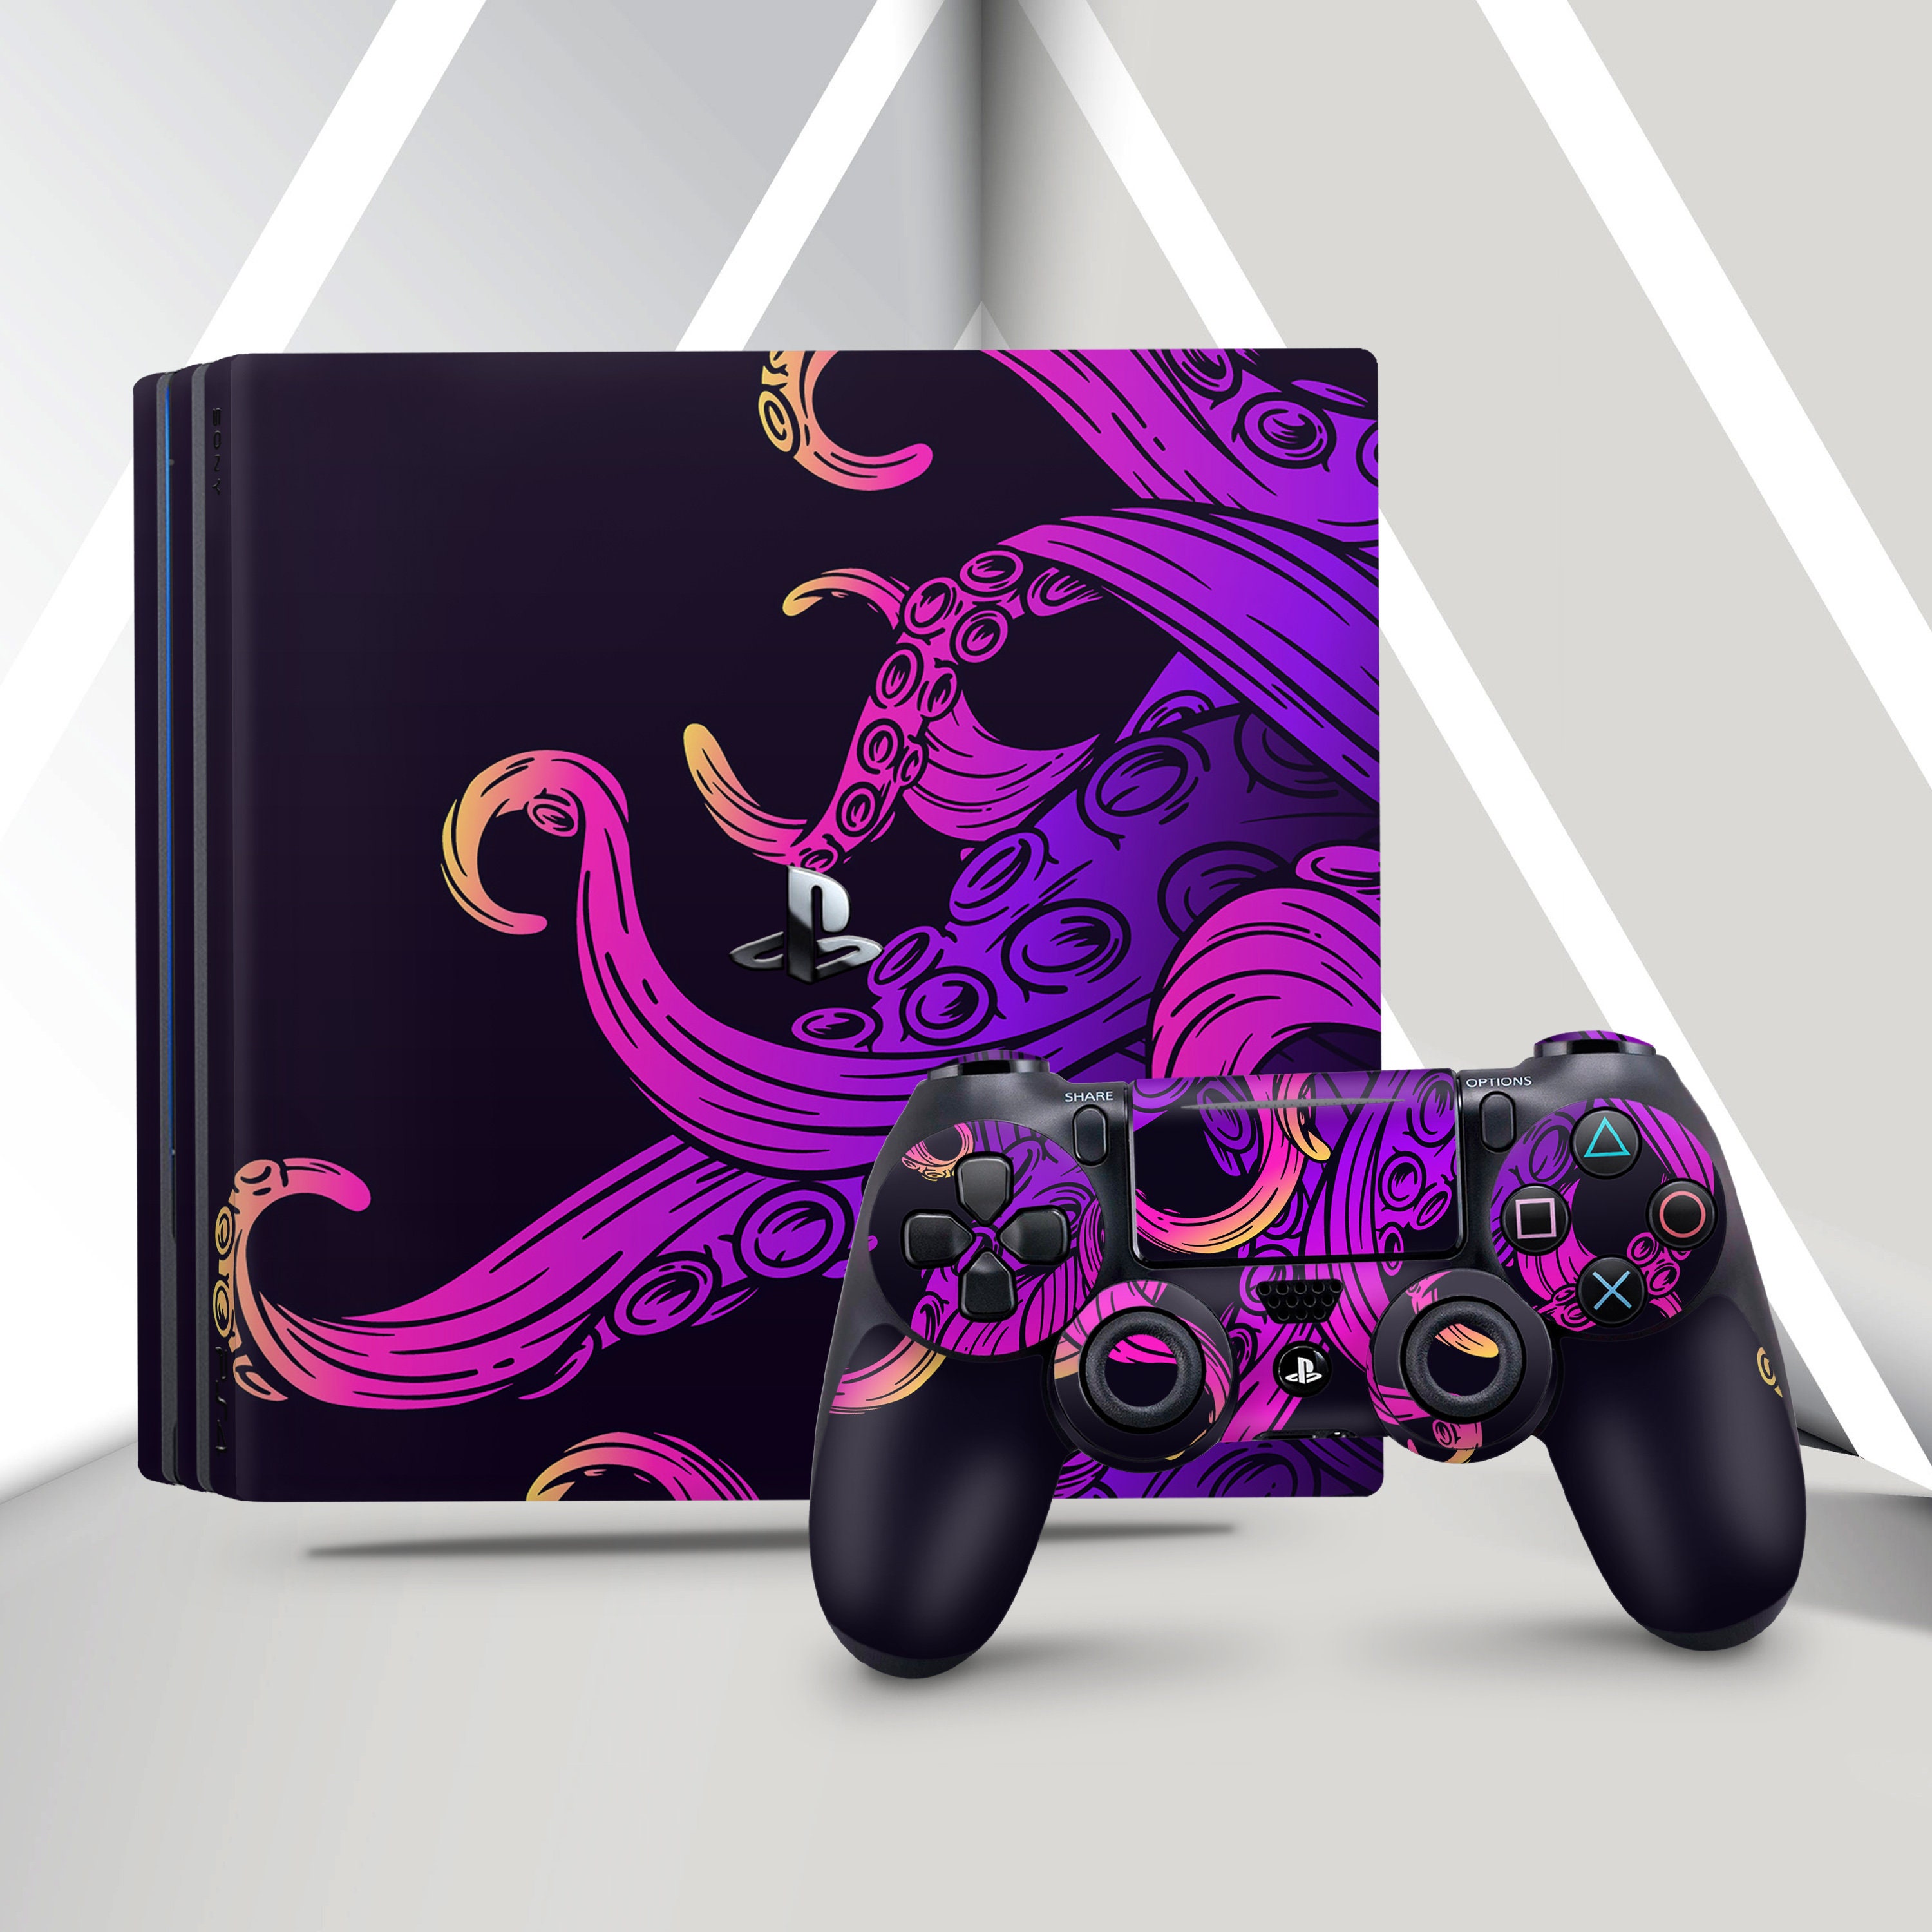 ROBLOX PS4 PRO PROTECTIVE SKIN DECAL VINYL STICKER WRAP